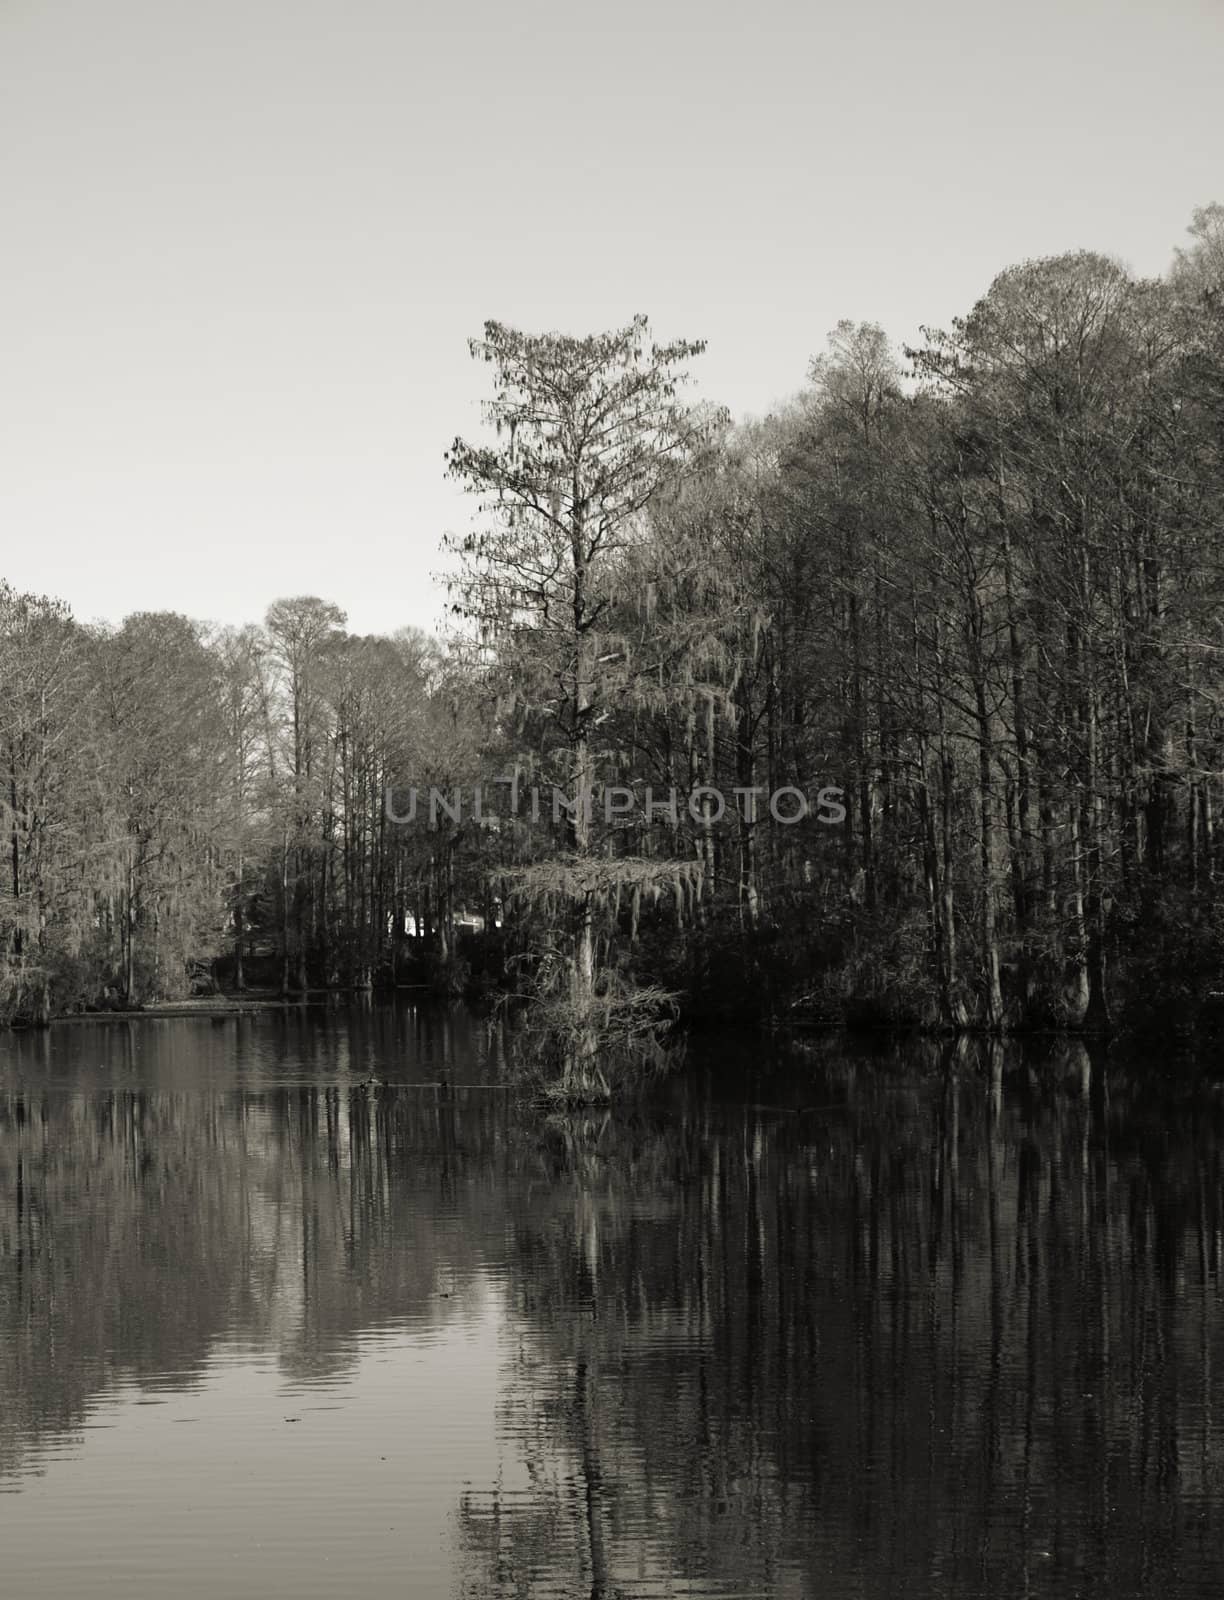 Trees along the shore of a swampy lake during the winter. Shown in black and white